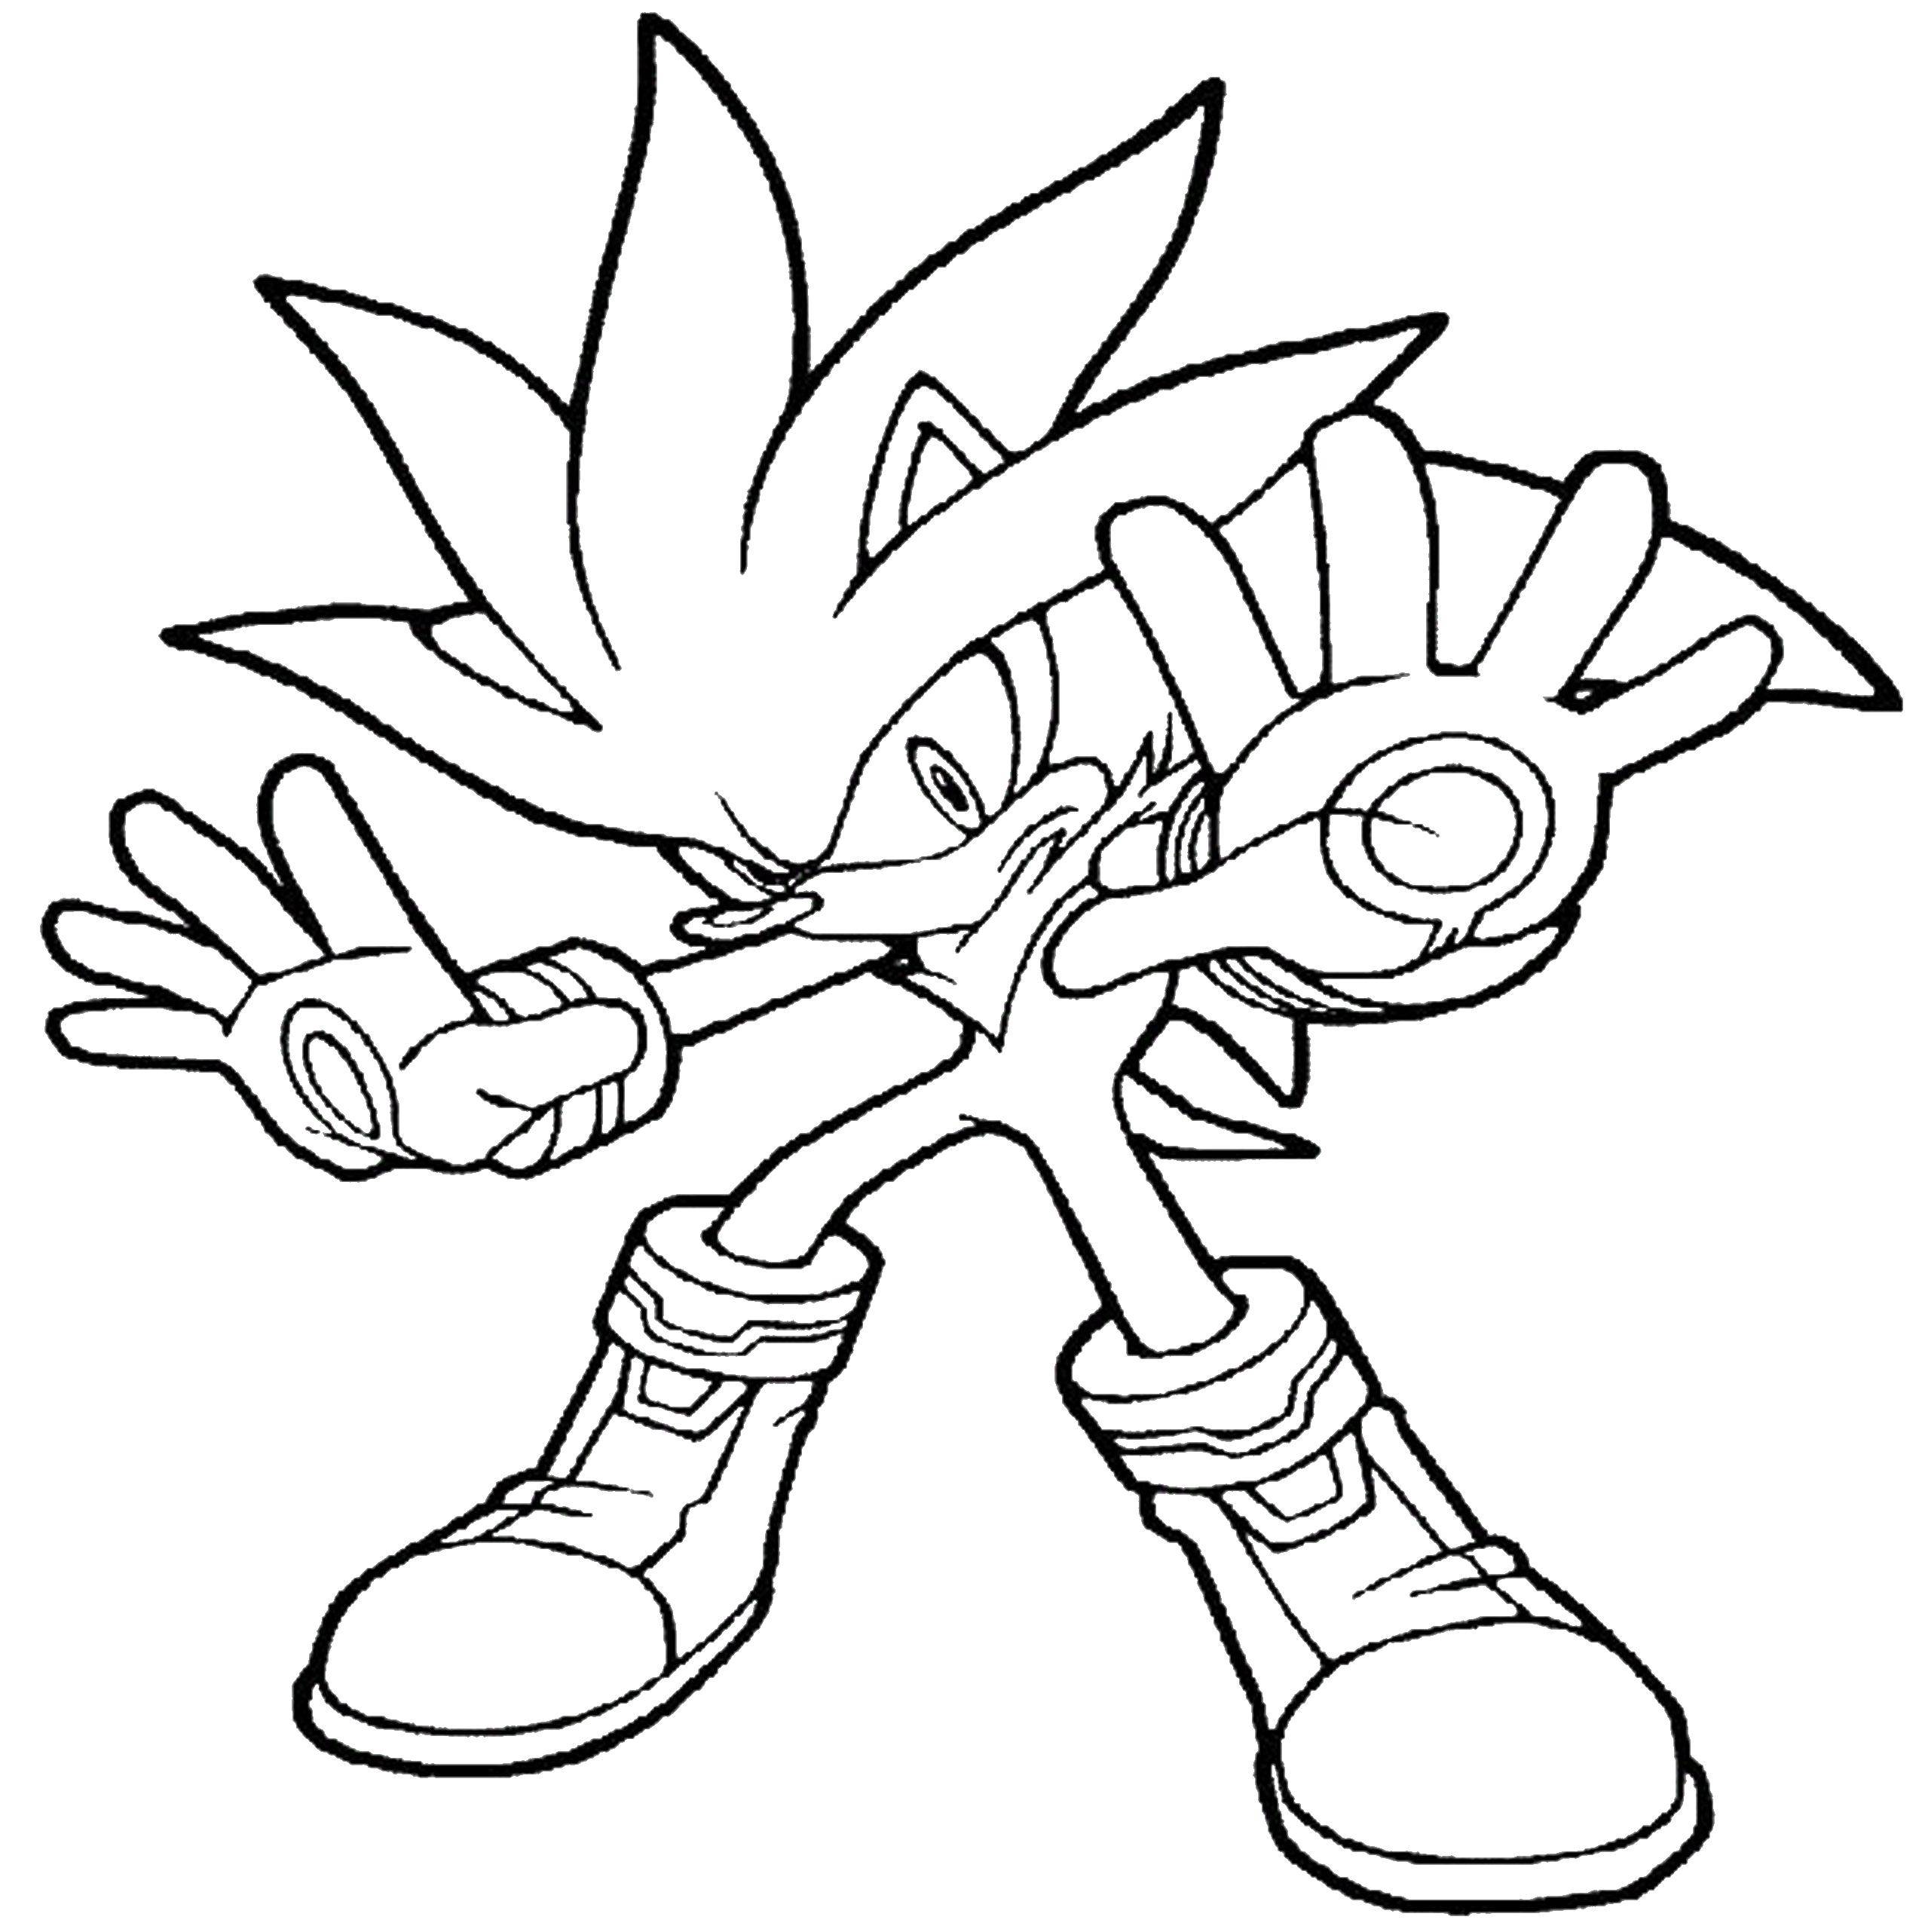 Coloring Sonic. Category cartoons. Tags:  cartoons, sonic x, cartoons, speed.